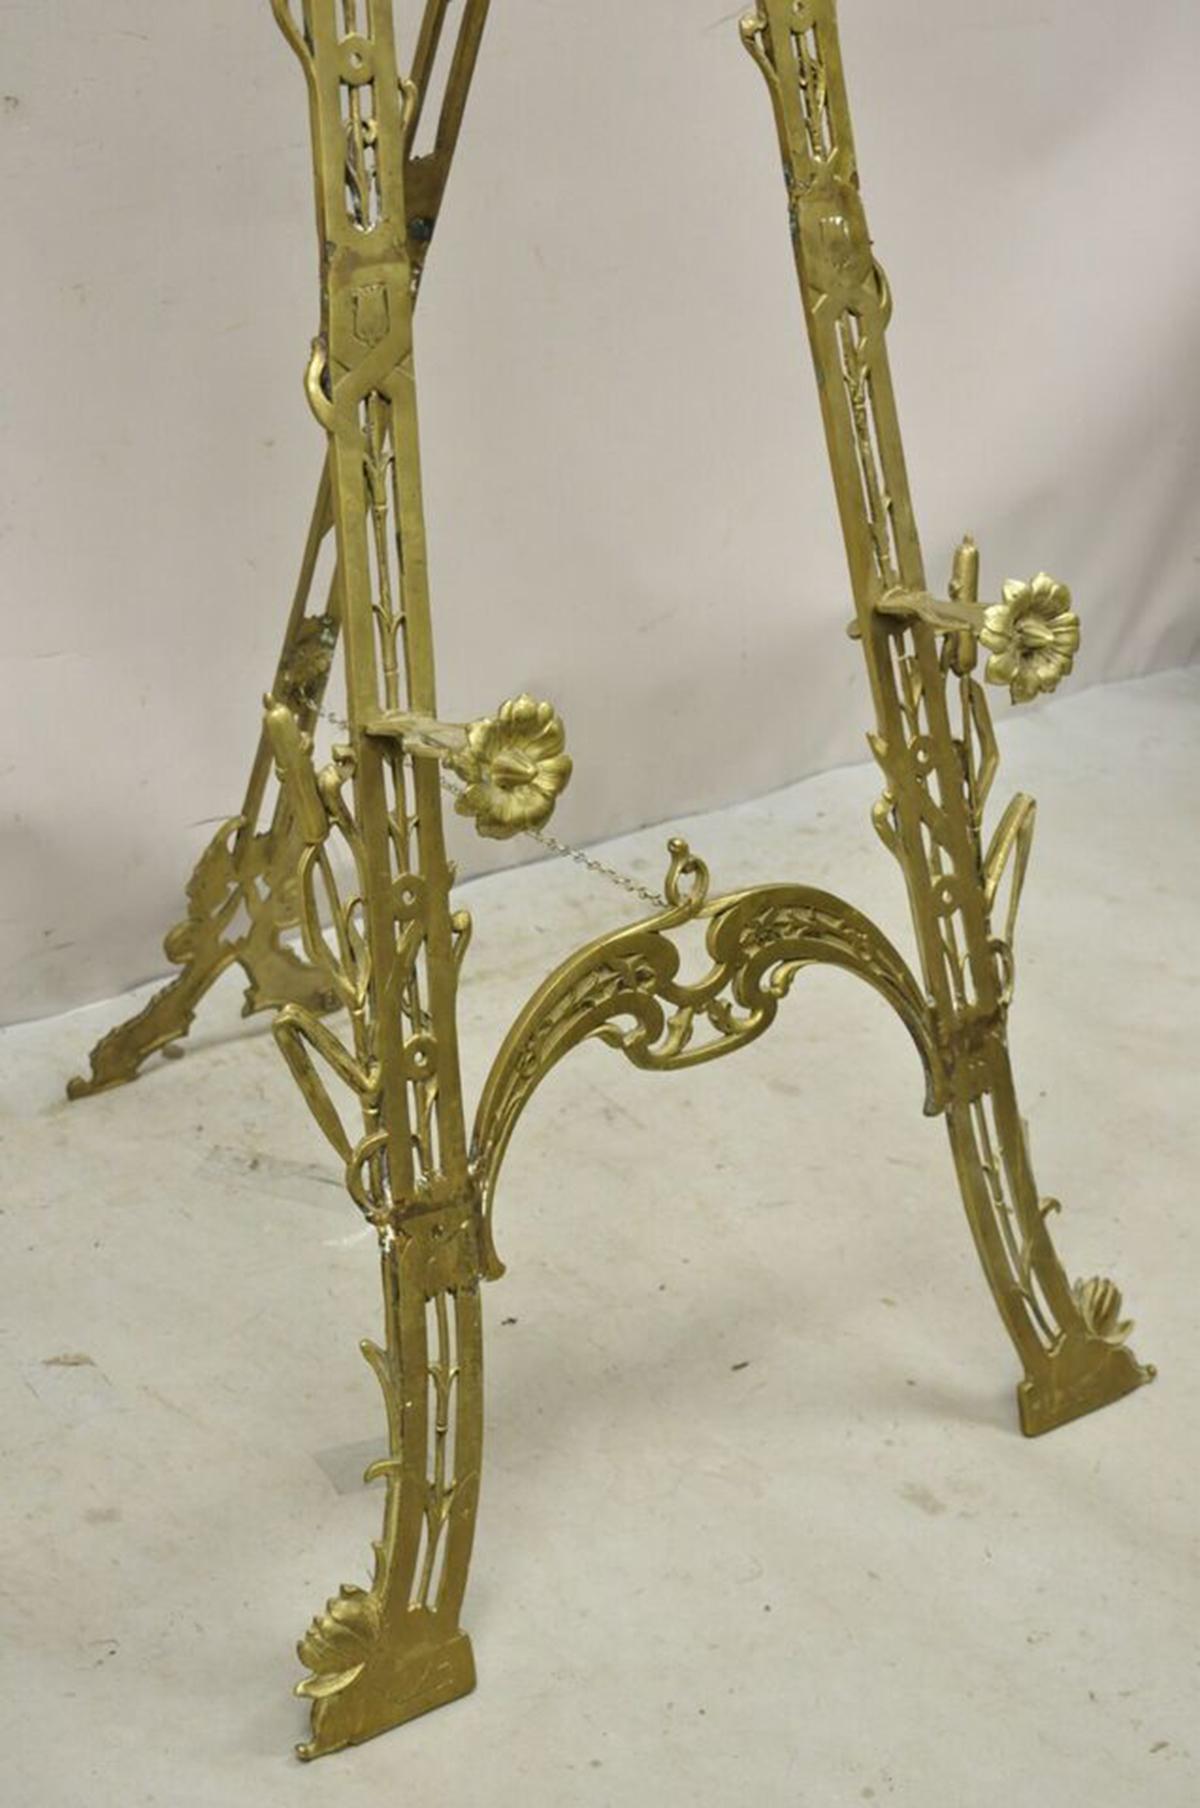 Large Vintage Nouveau Aesthetic Style Figural Brass Tall Art Easel Display Stand 1